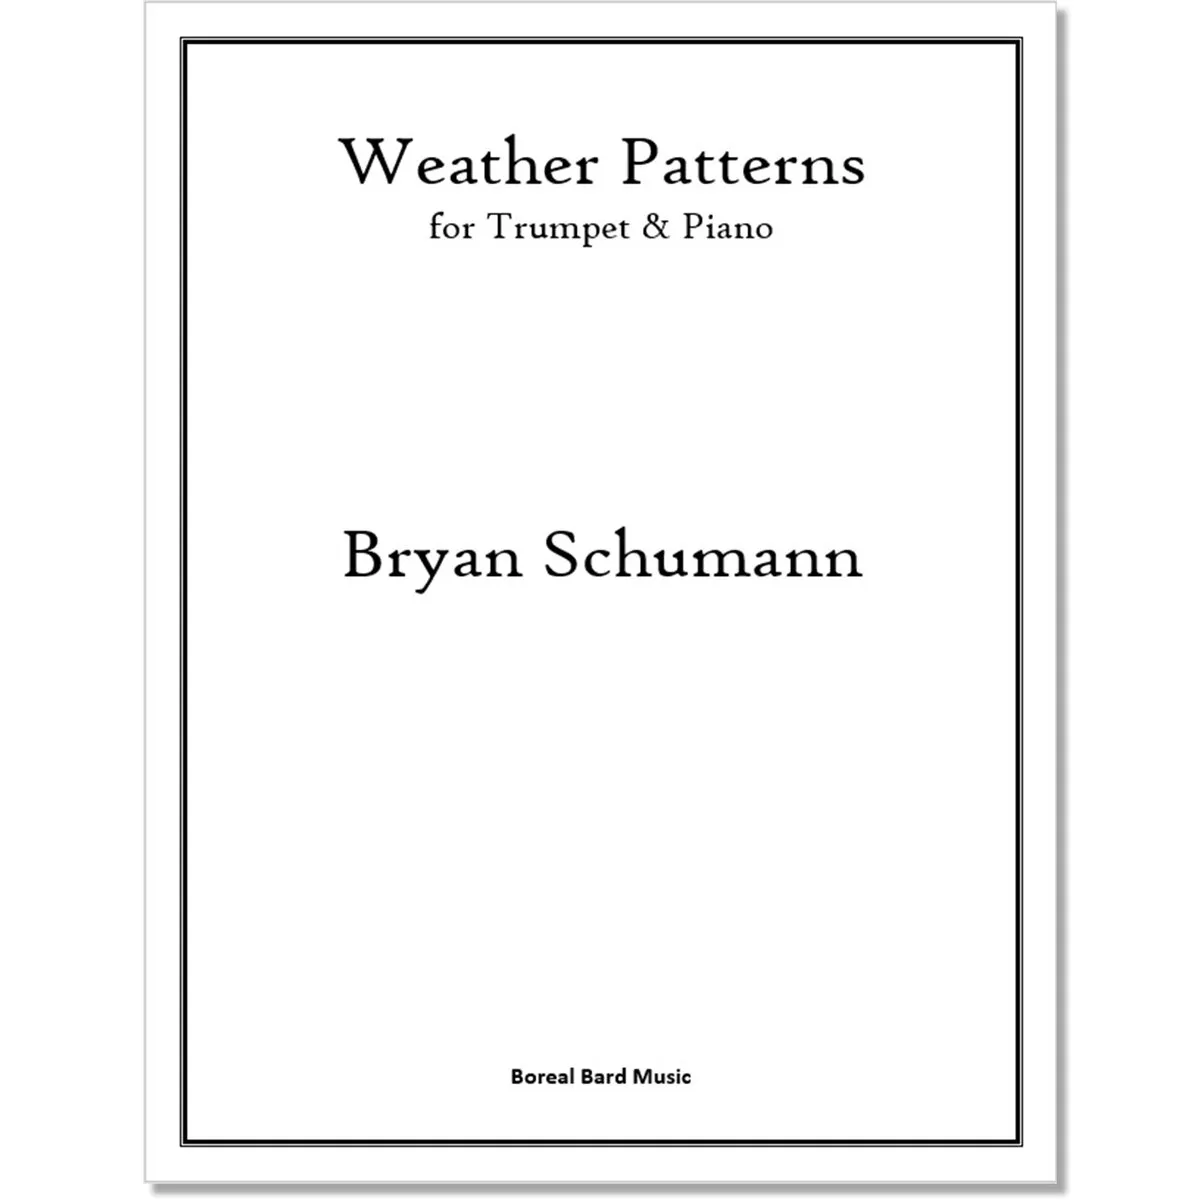 Weather Patterns for Trumpet & Piano (sheet music)